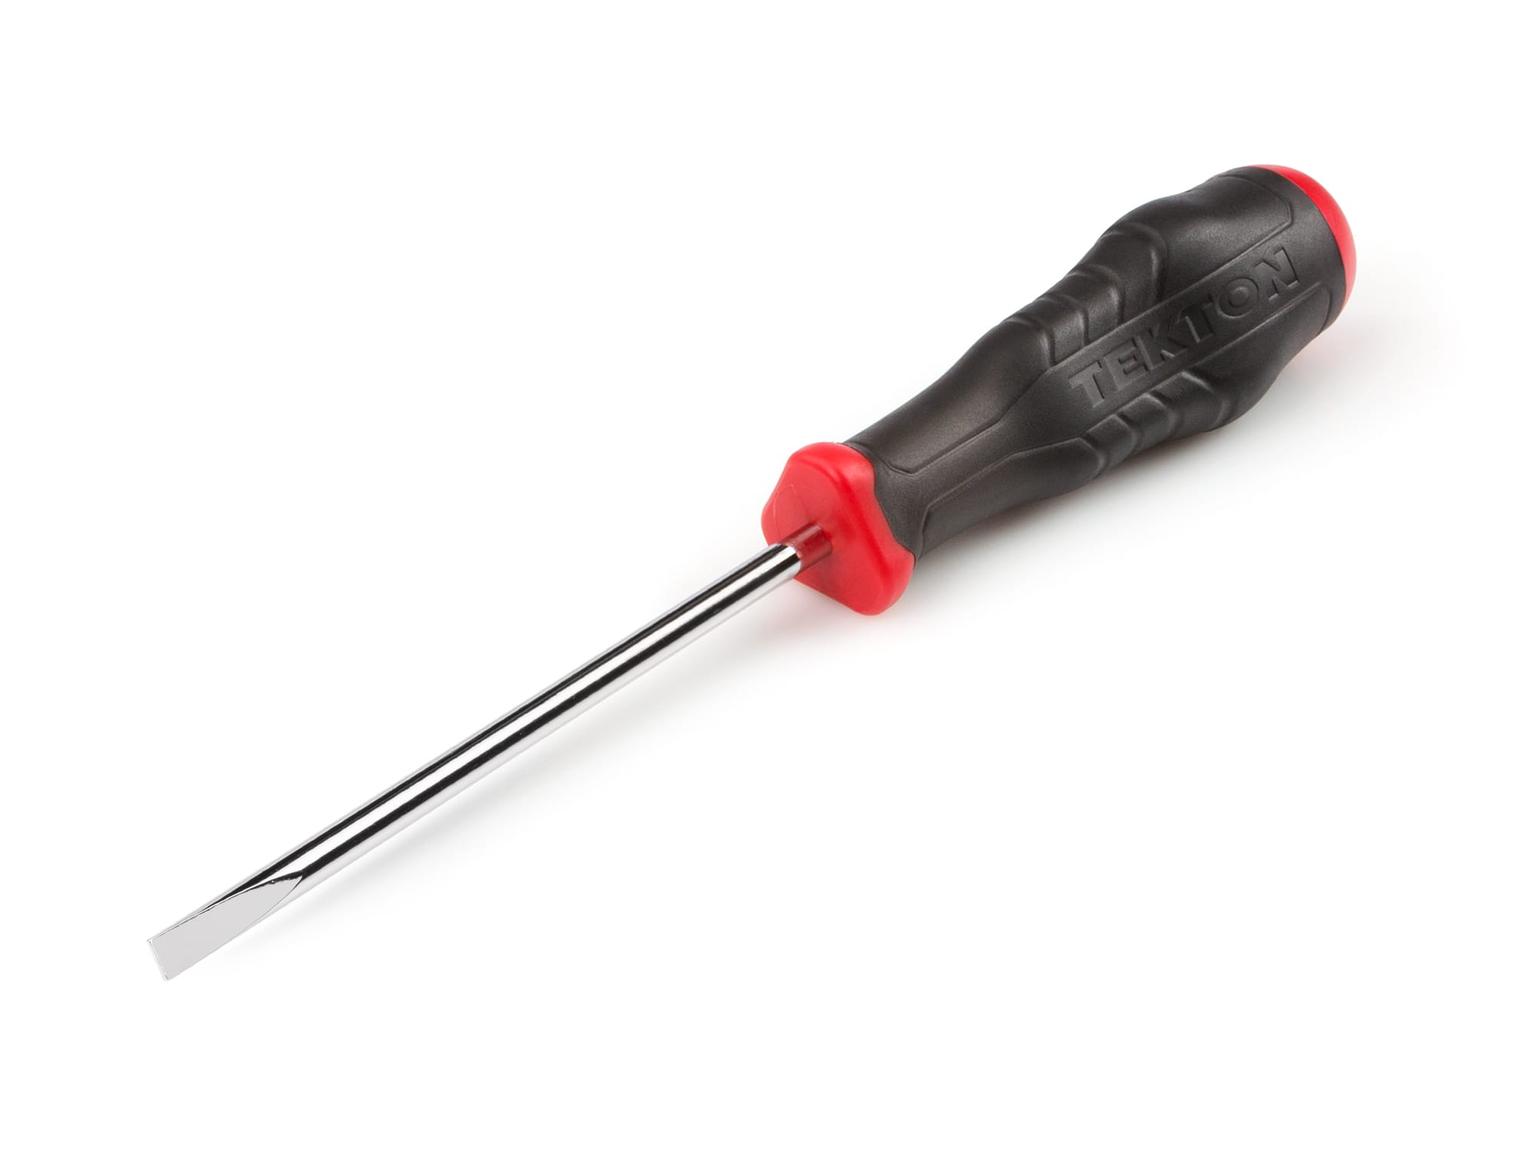 Individual Slotted High-Torque Screwdrivers